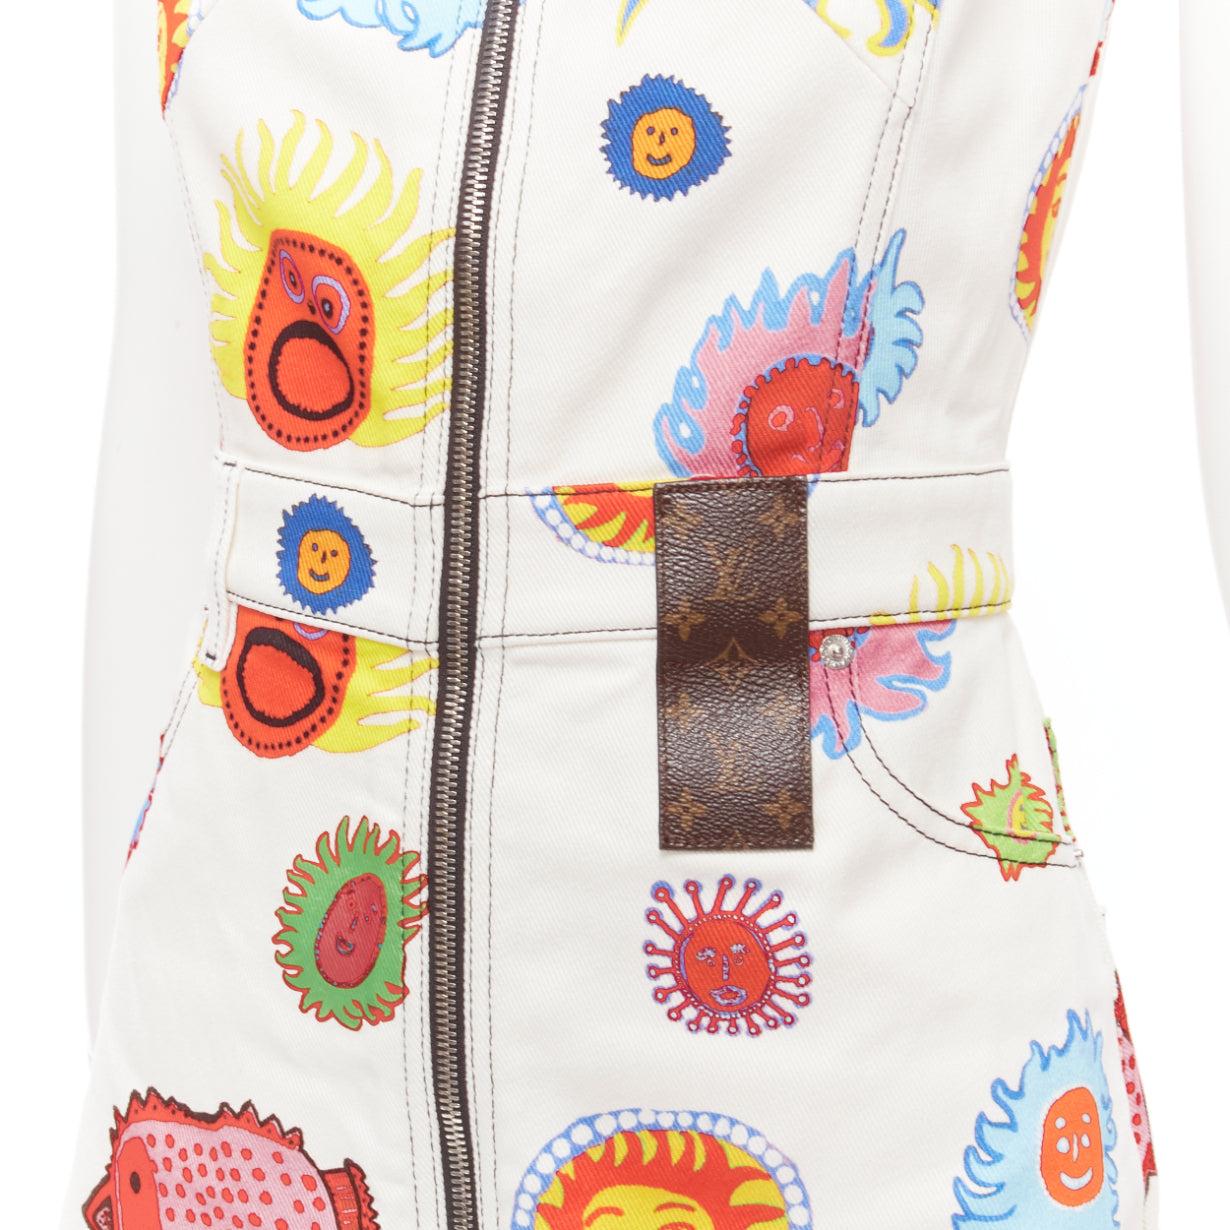 LOUIS VUITTON 2023 Yayoi Kusama Sun Faces weiß Denim Monogram Patch Zip Up Kleid FR34 XS
Referenz: AAWC/A00507
Marke: Louis Vuitton
Modell: 1AB7ON
Collection'S: Yayoi Kusama 2023 - Laufsteg
MATERIAL: Baumwolle
Farbe: Weiß, Multicolour
Muster: